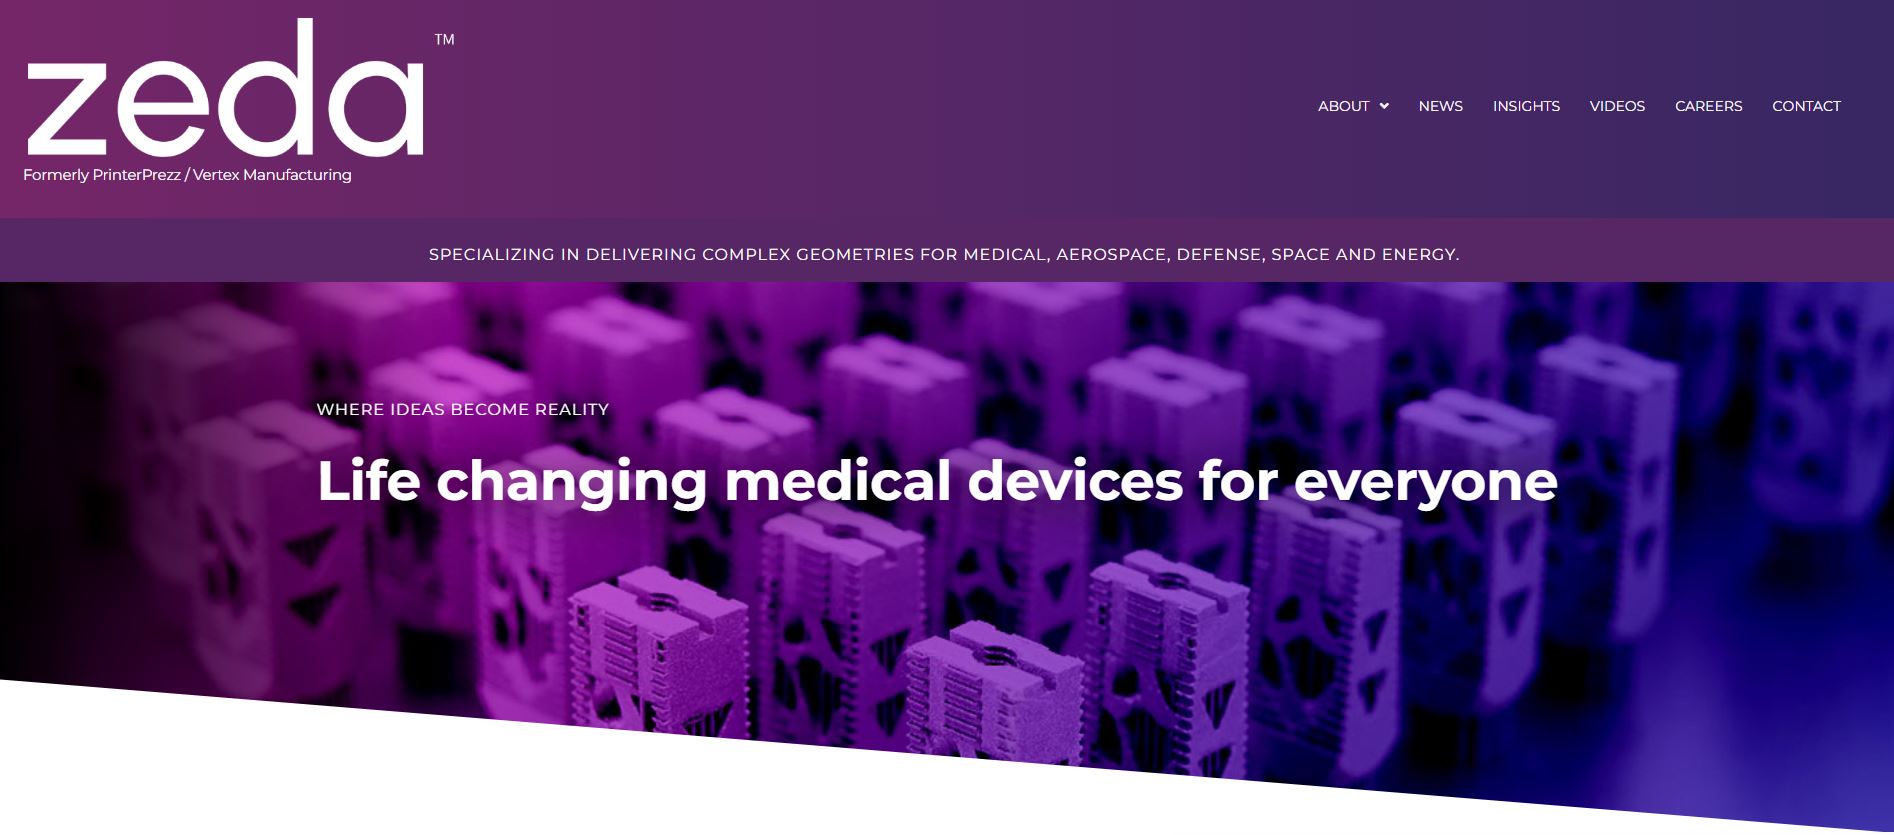 Zeda, a medical startup, has raised an impressive $52 million in its Series B funding round